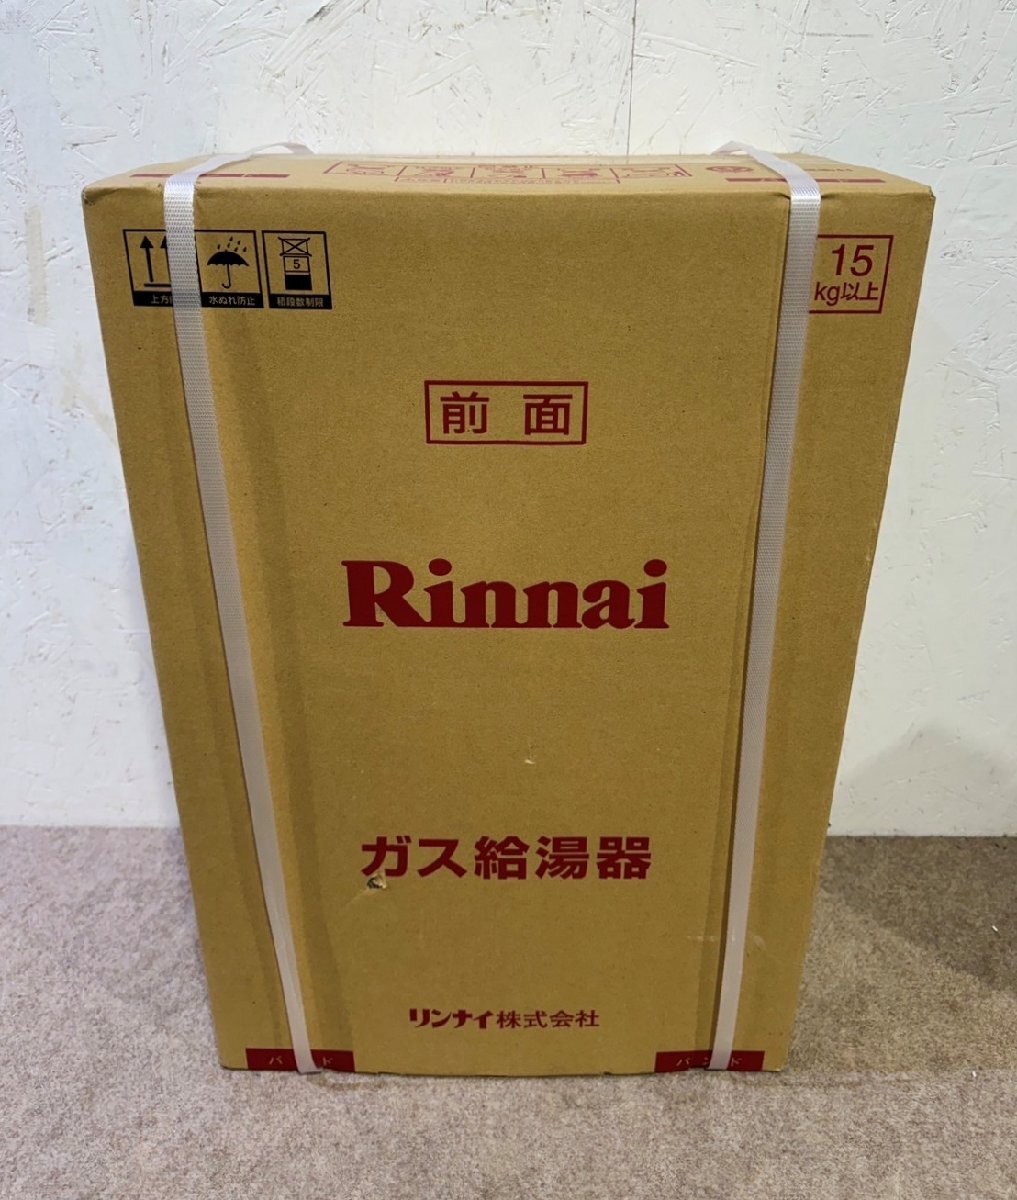  new goods unused Rinnai/ Rinnai gas water heater RUX-A1616W-E 16 number 2023 year made city gas outdoors wall hanging remote control MC-145V(A) attaching 